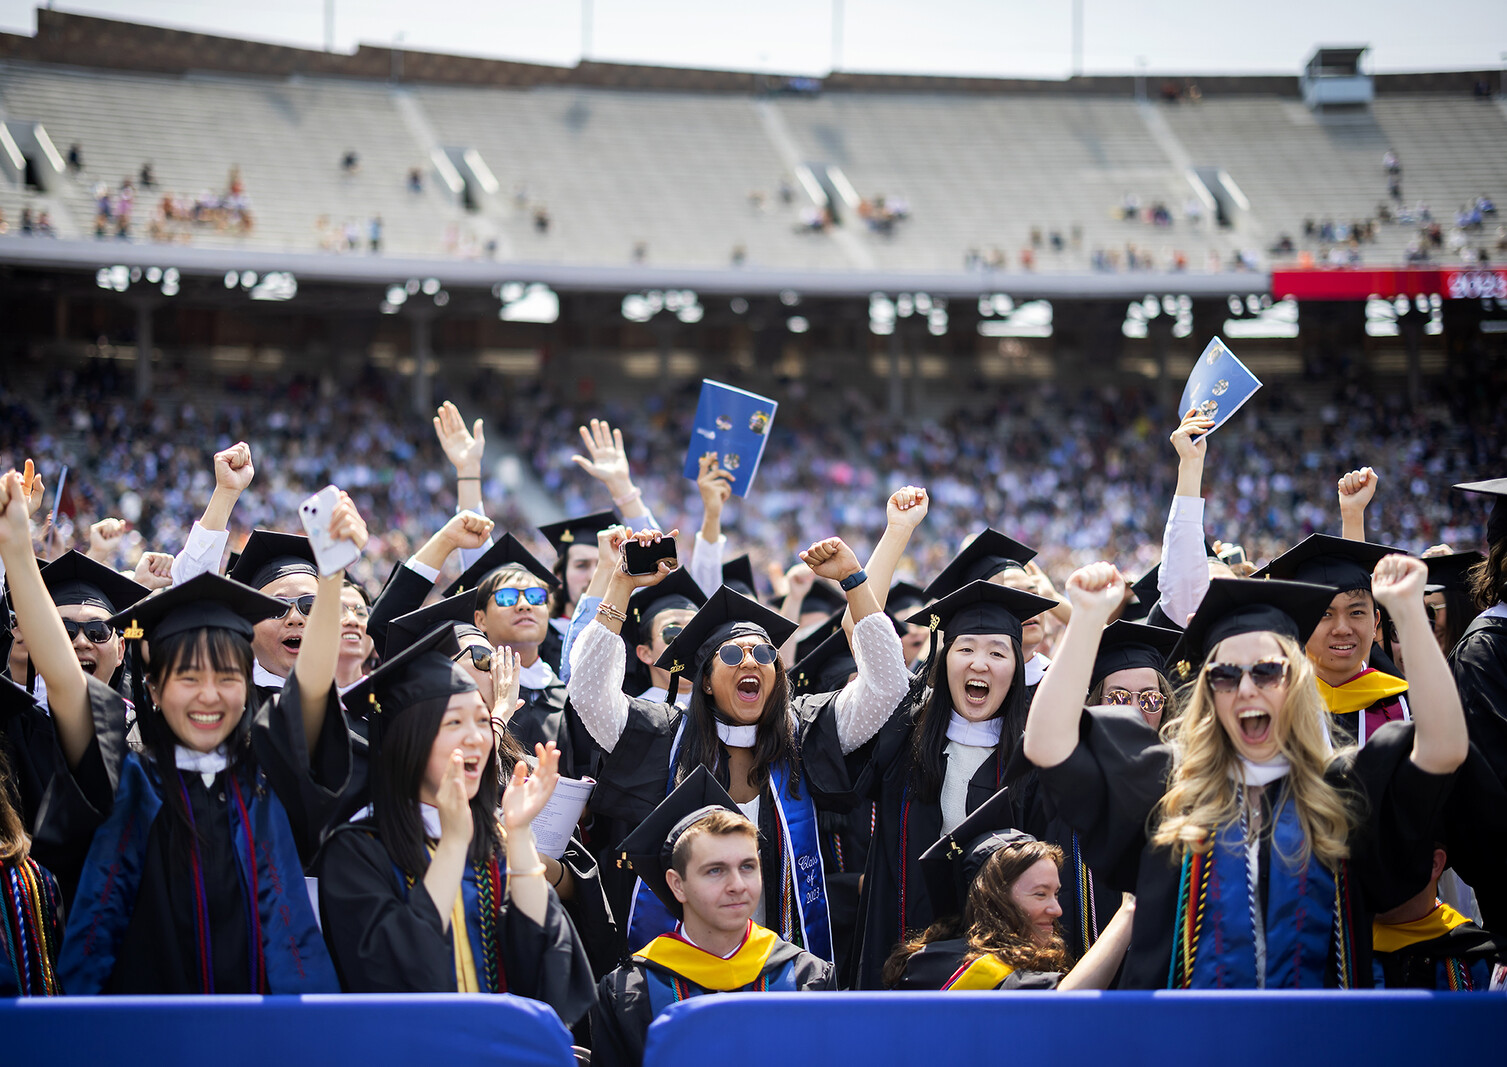 graduates cheering during commencement